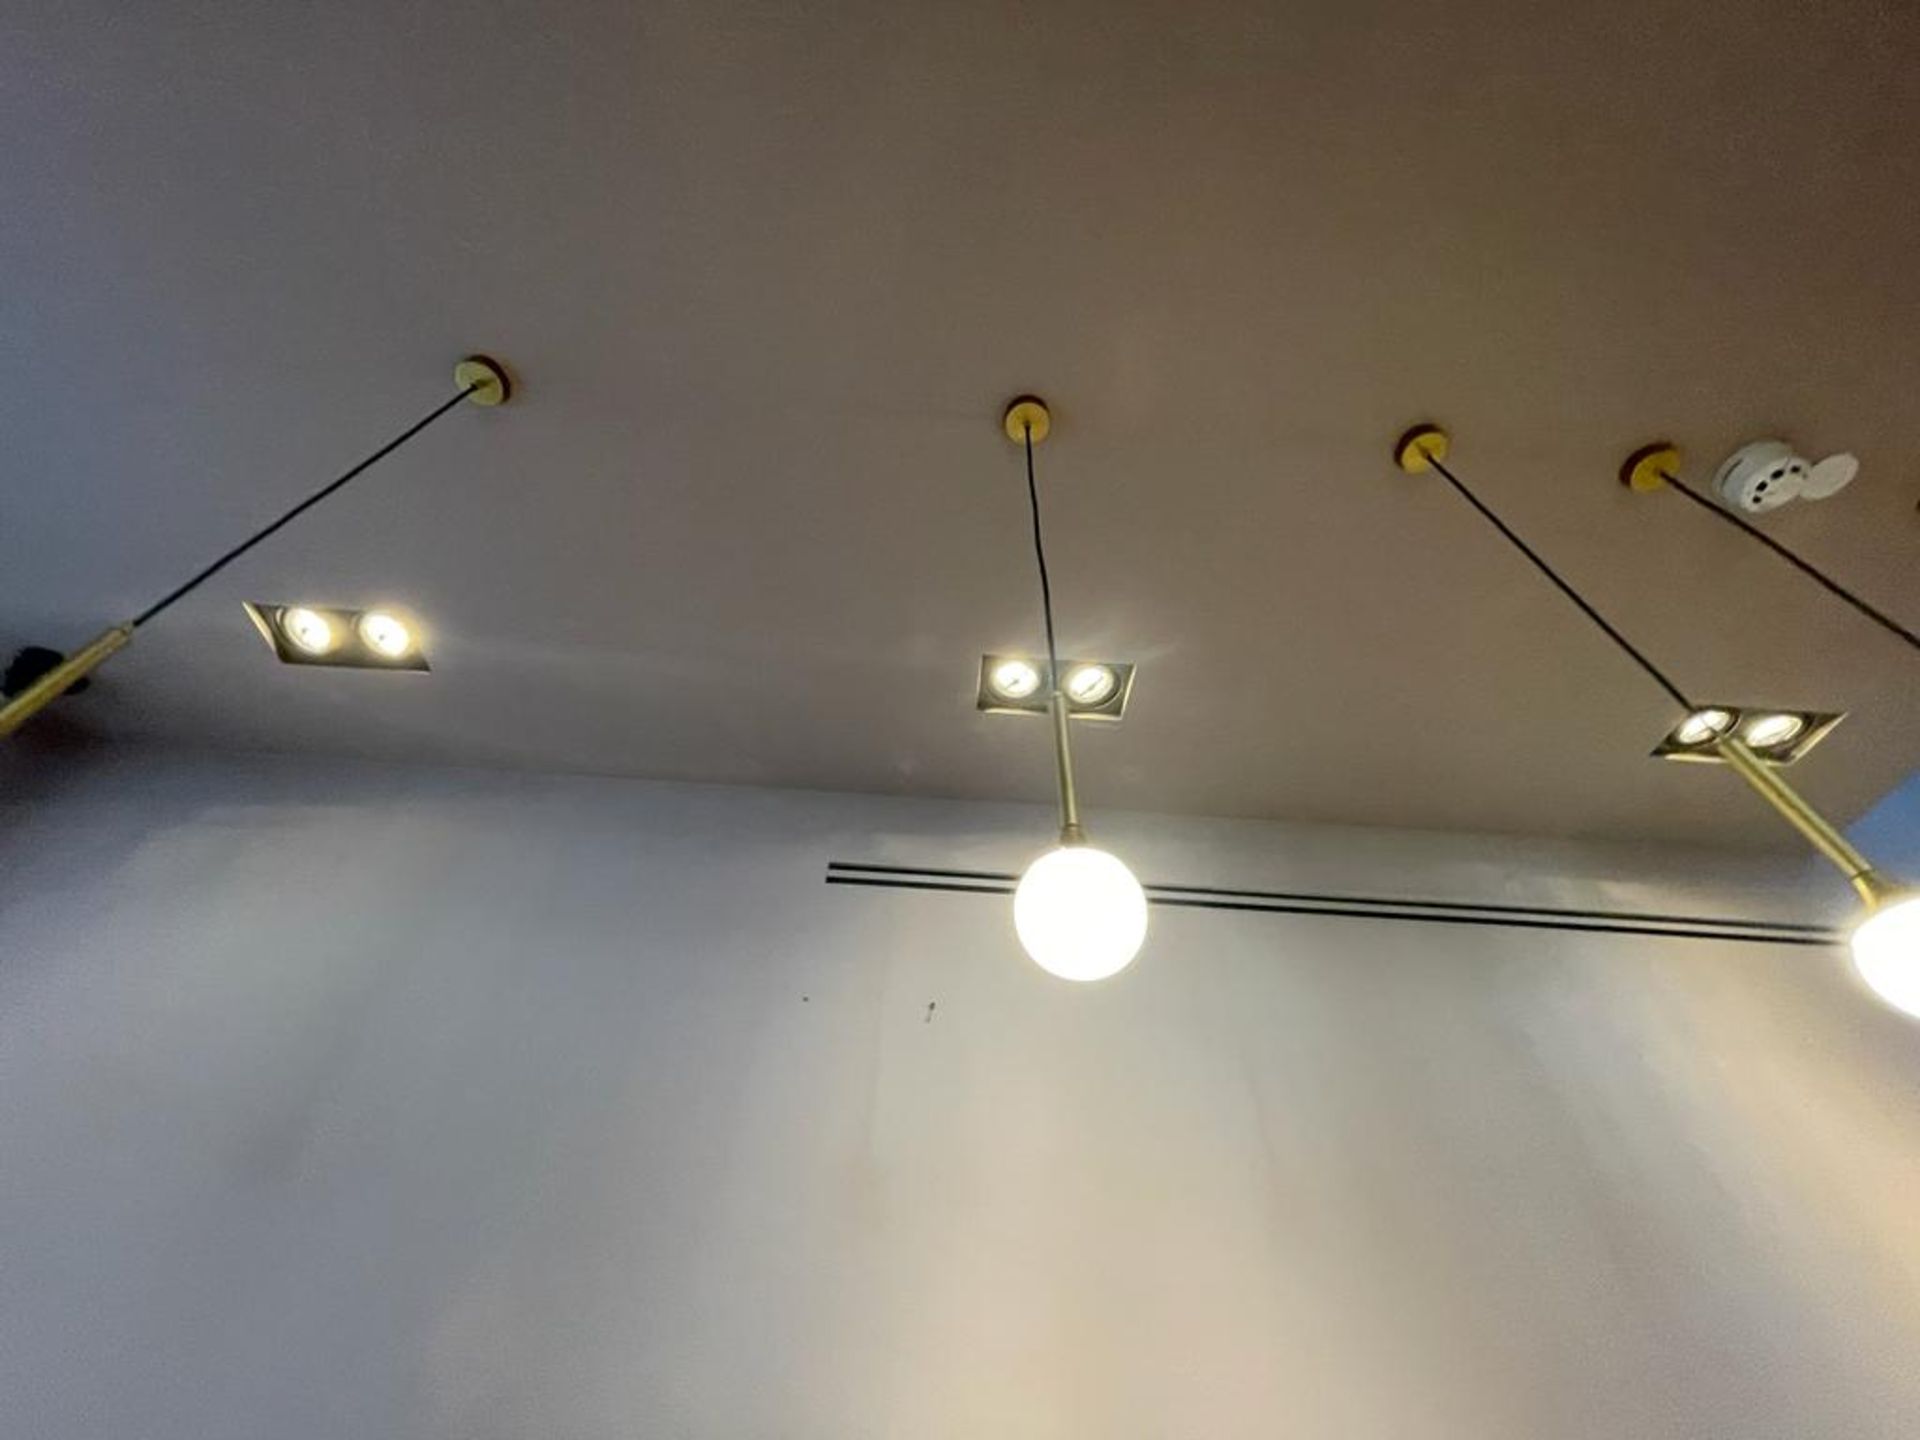 4 x Hand Made 'Petite' Suspension LED Ceiling Lights By Delight Lighting - Image 10 of 10